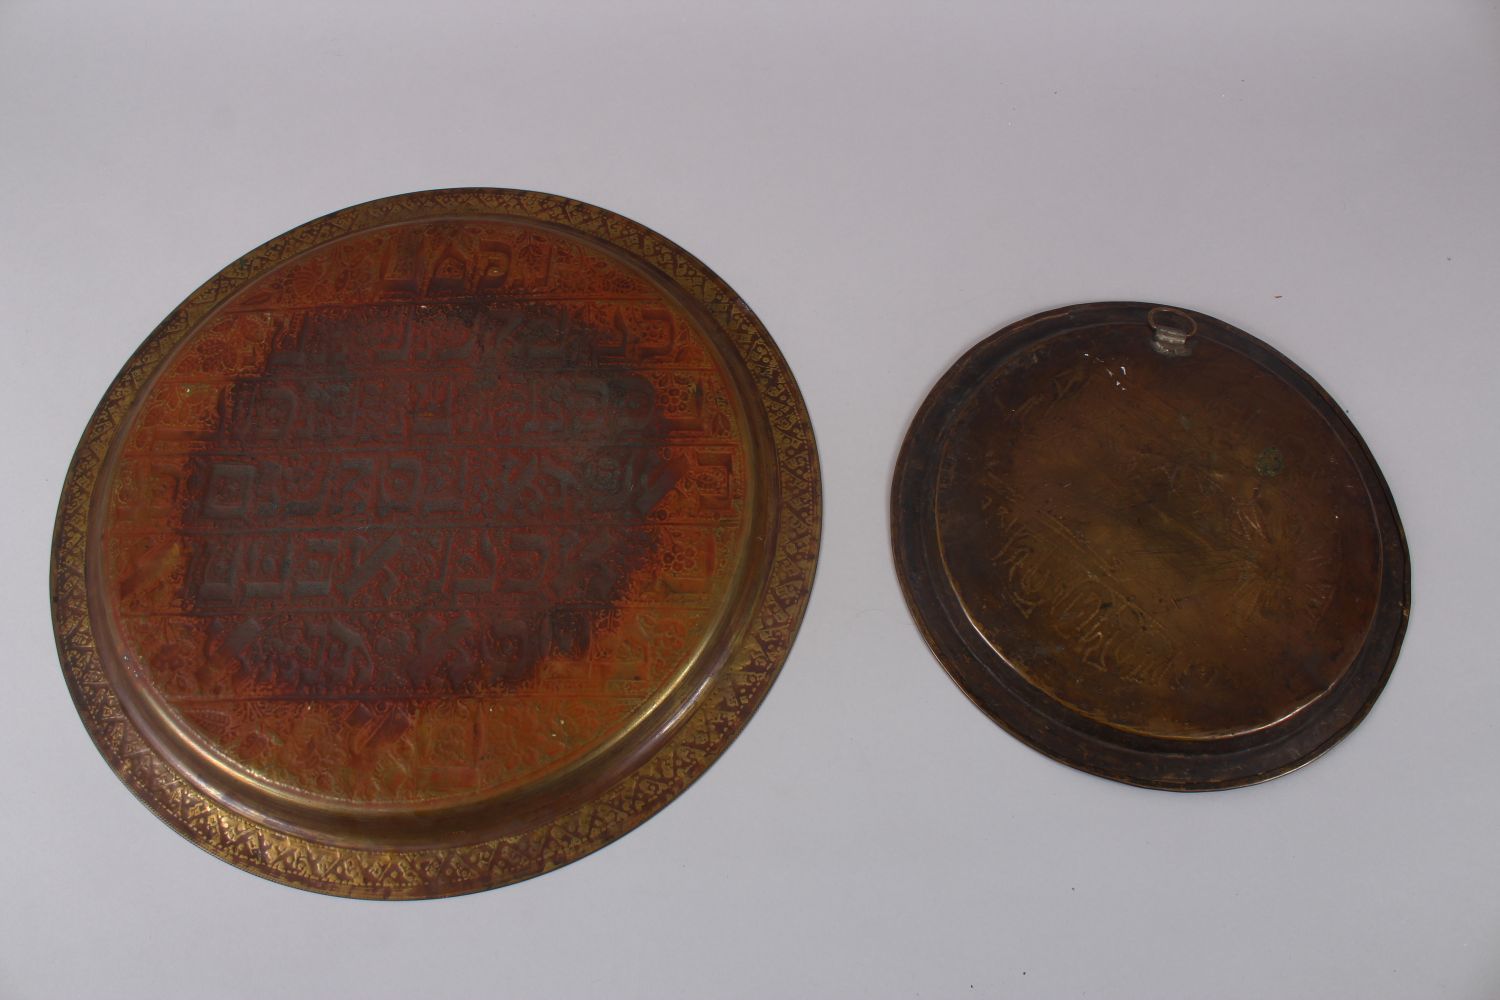 TWO GOOD 19TH CENTURY JUDAICA/ISLAMIC BRASS CHARGERS, the larger charger decorated with Arabic - Image 4 of 4